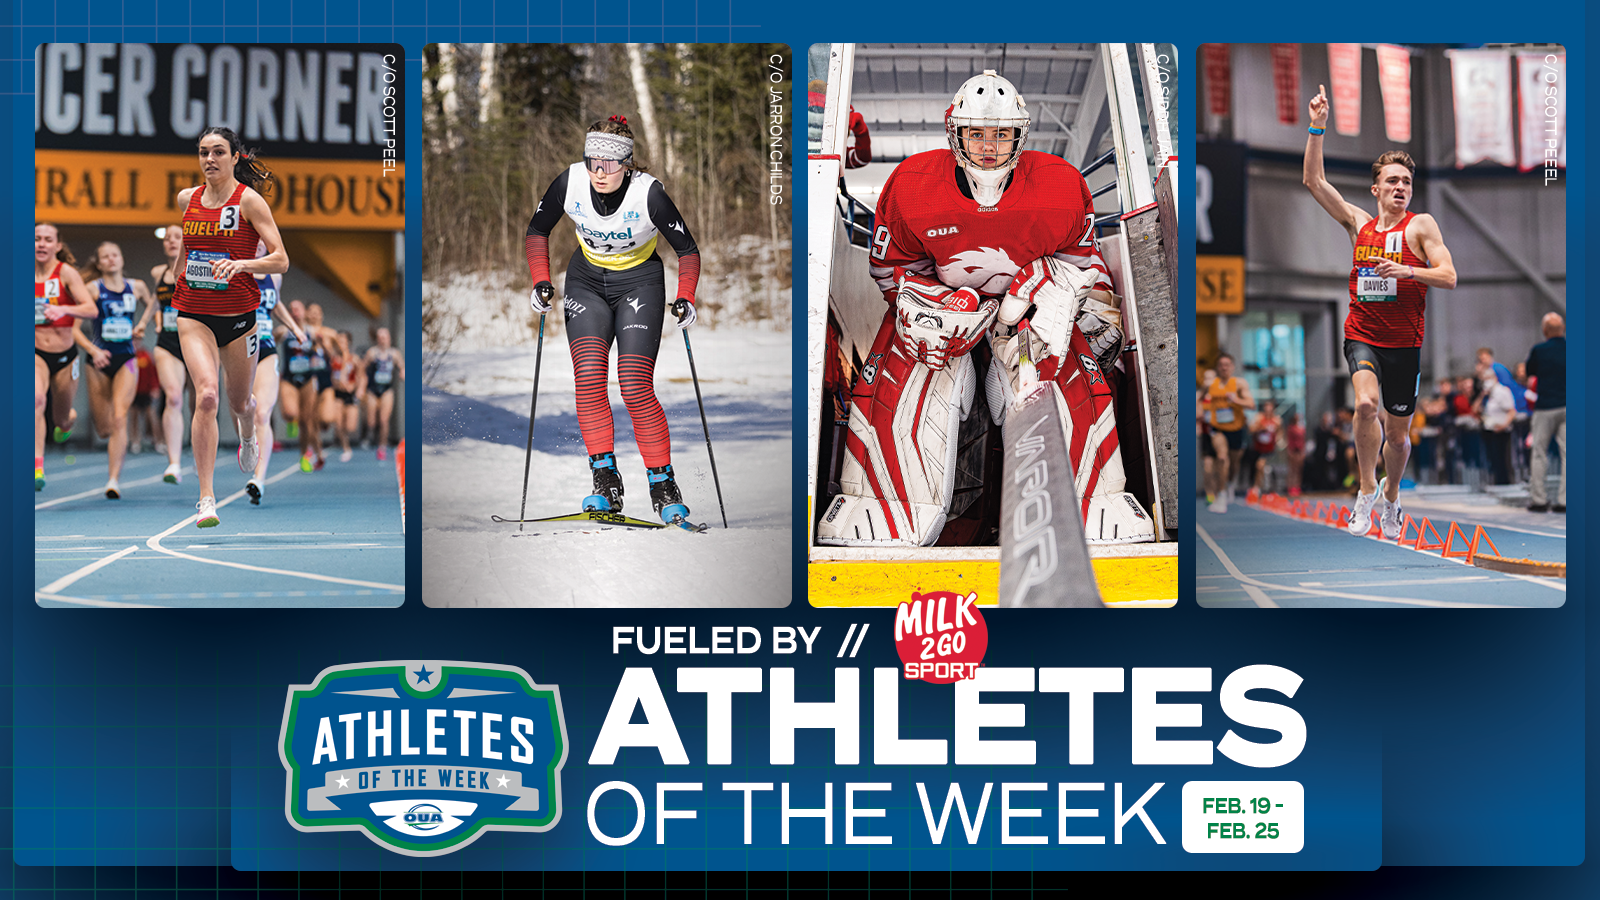 Graphic on a predominantly blue background with images and text. Three images are large and centered across the length of the graphic. The text logo at the bottom reads "Athletes of the Week" stating the time period of "February 19- February 25" 2024. From left to right, the athletes are Julia Agostinelli of Guelph Gryphons Women's Track and Field, Maggie McClure or Carleton Ravens Women's Nordic Skiing, Emma Wedgewood of York Lions Women's Hockey, and Max Davies of Guelph Gryphons Men's Track and Field